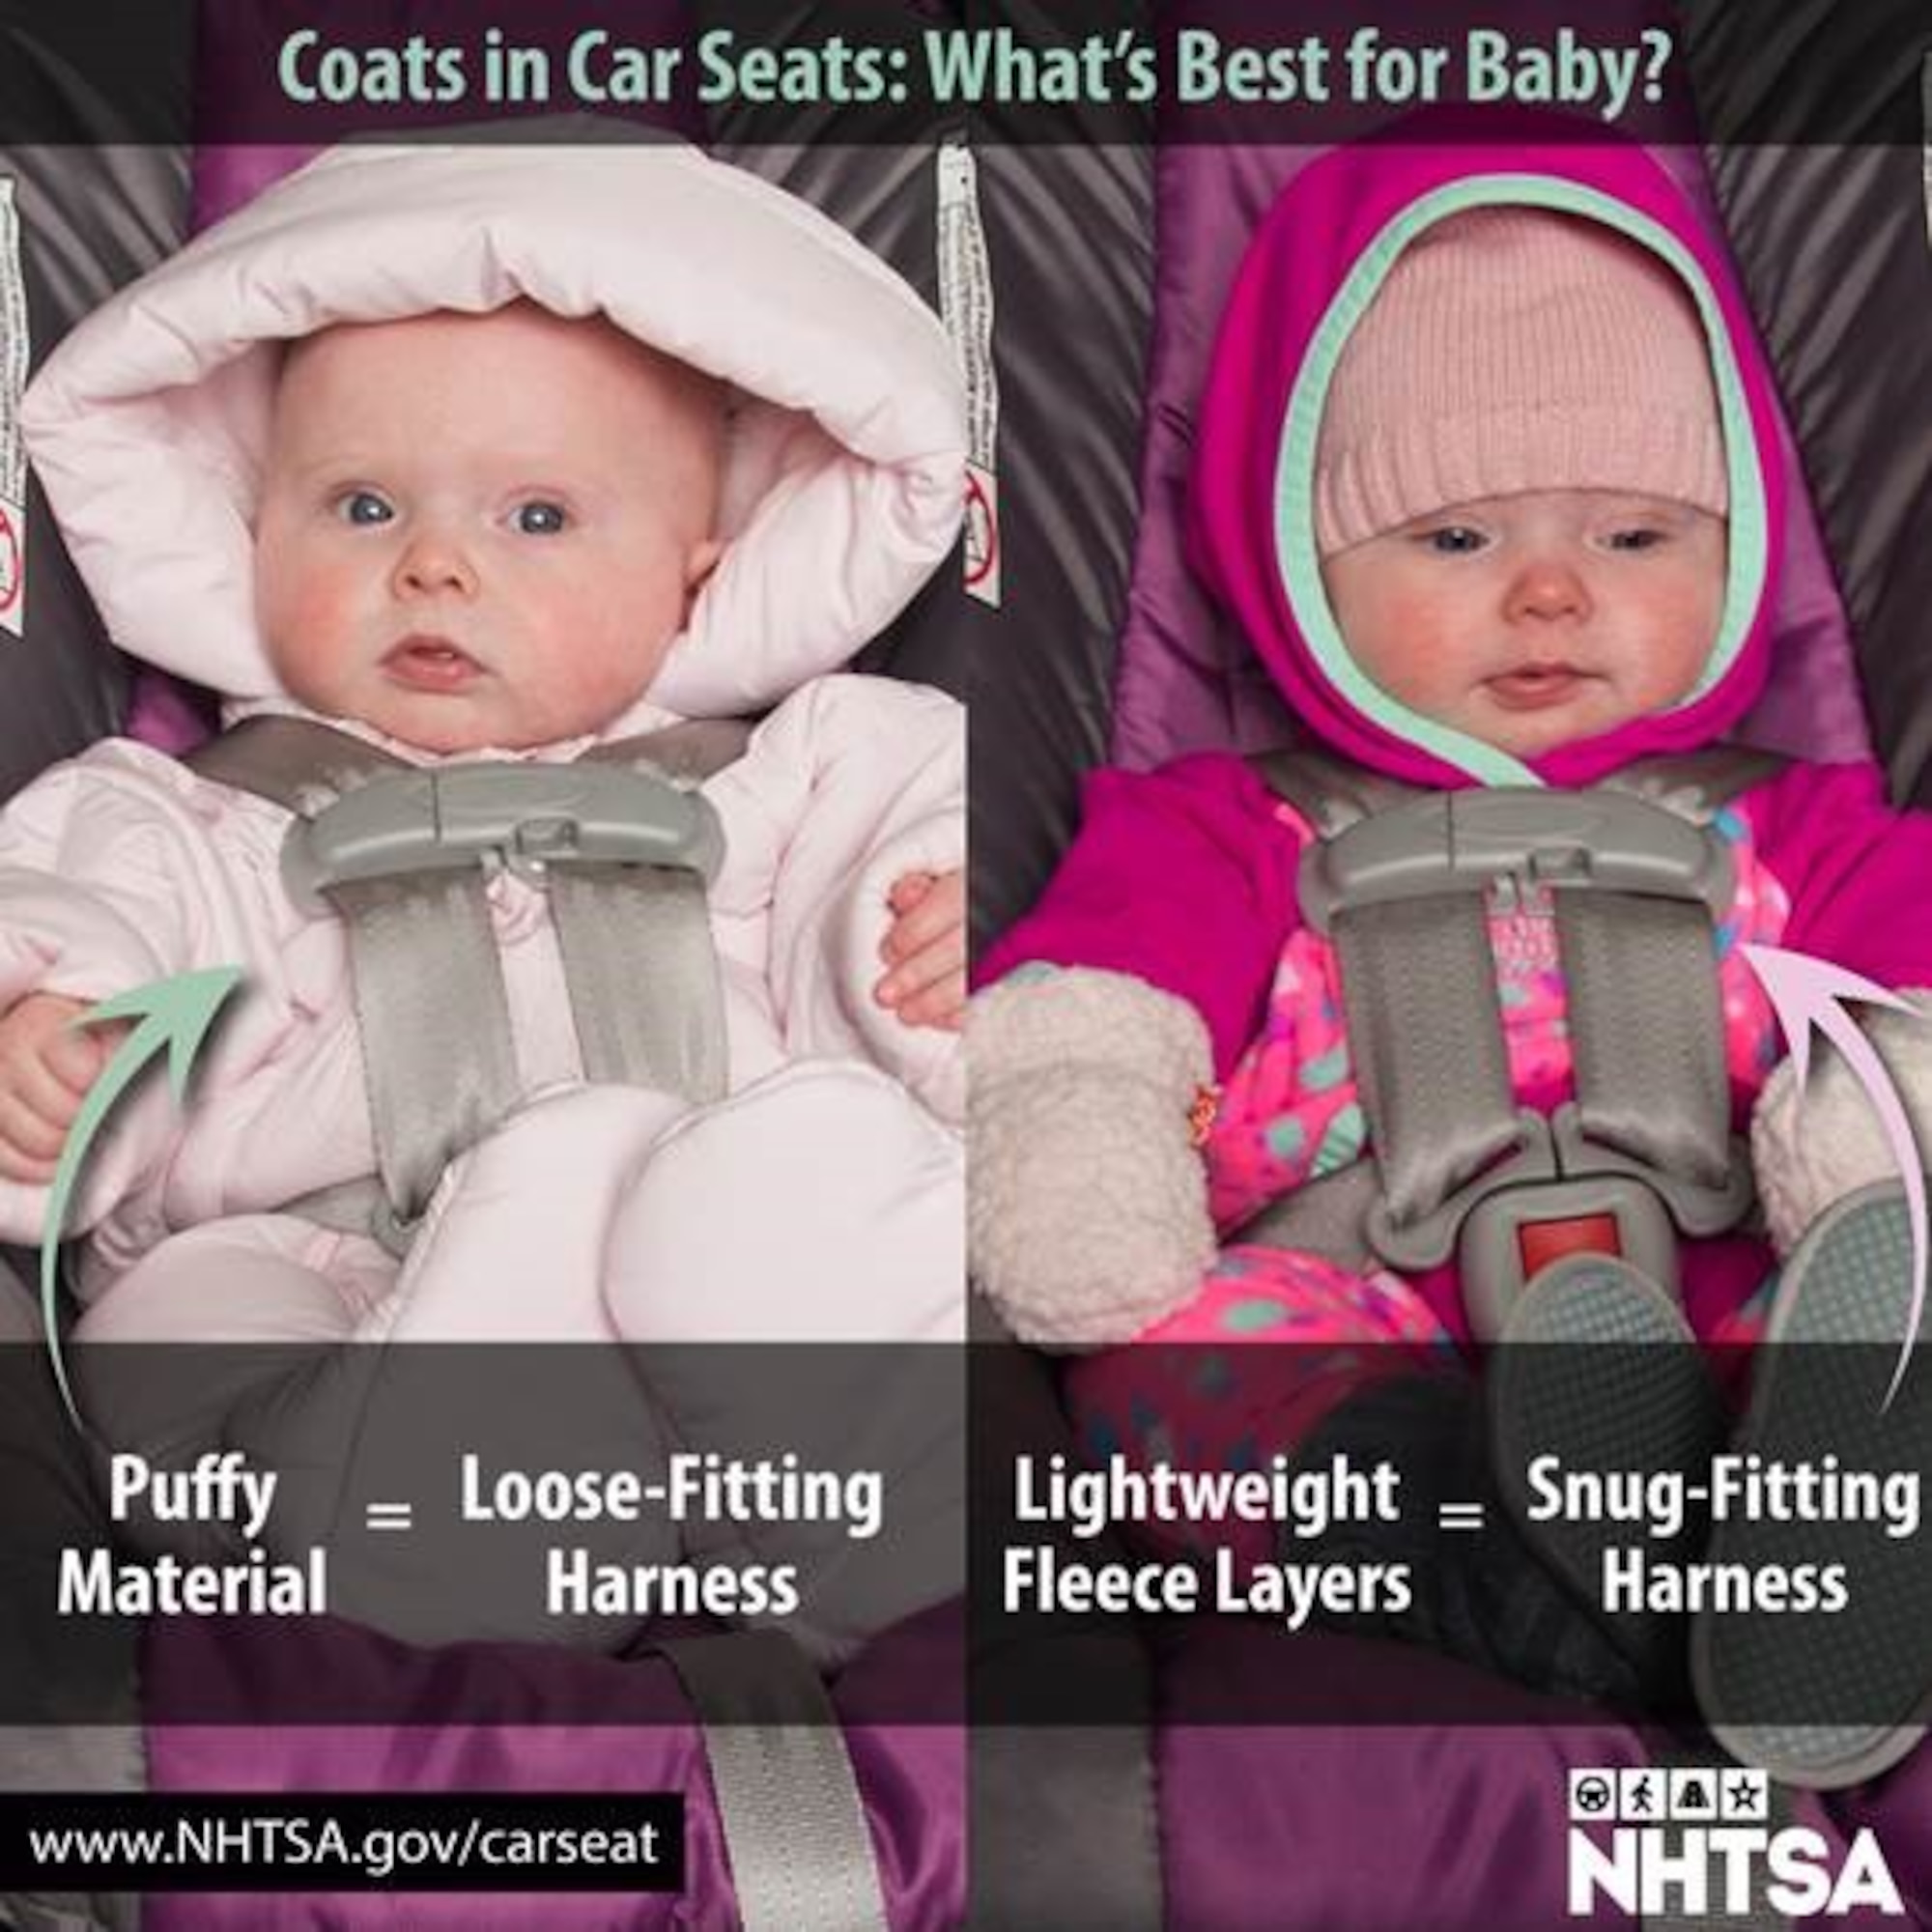 Winter car seat safety for infants, toddlers and kids; decrease